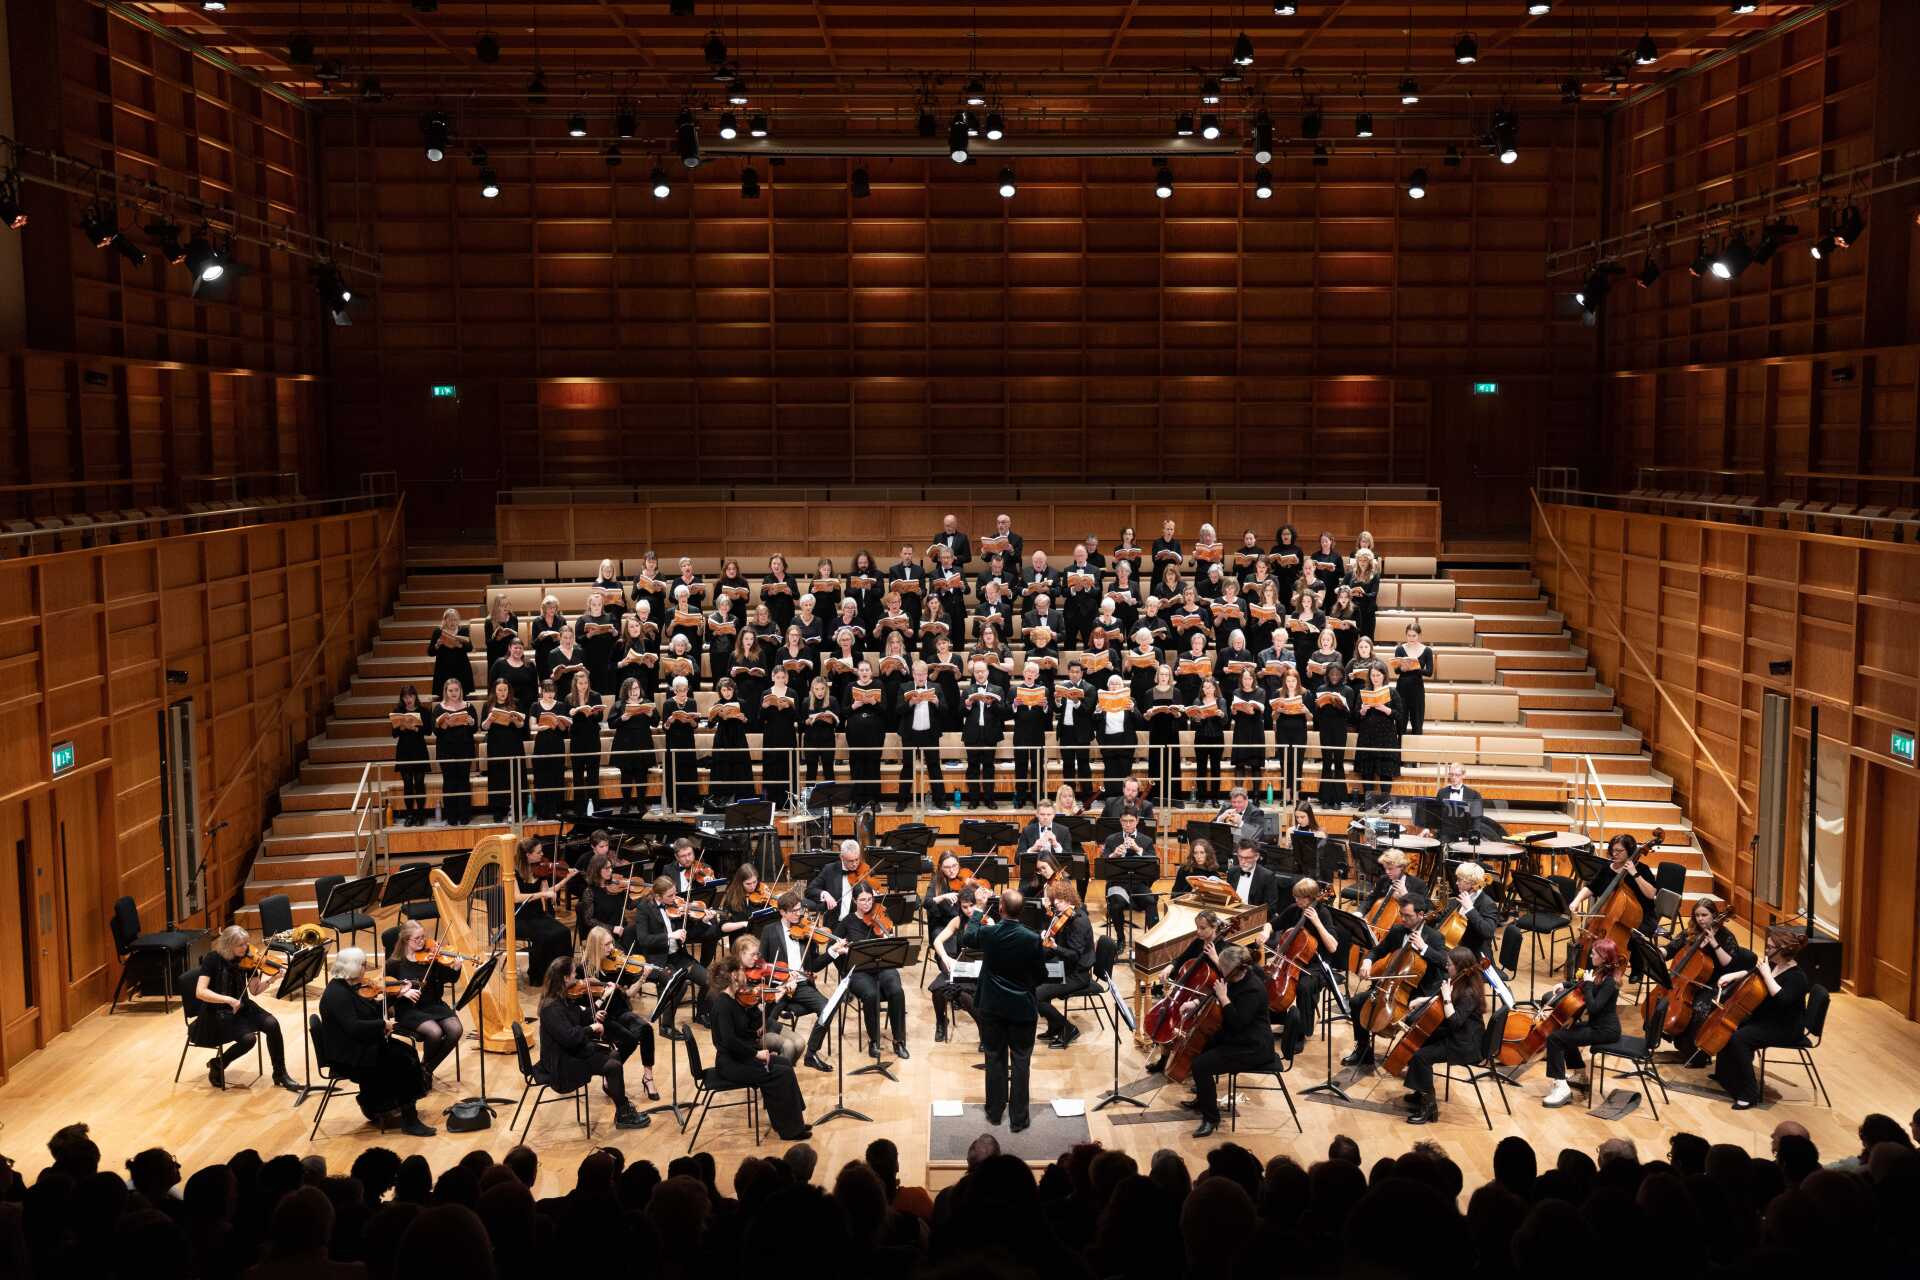 Choir and orchestra performing in a concert-hall